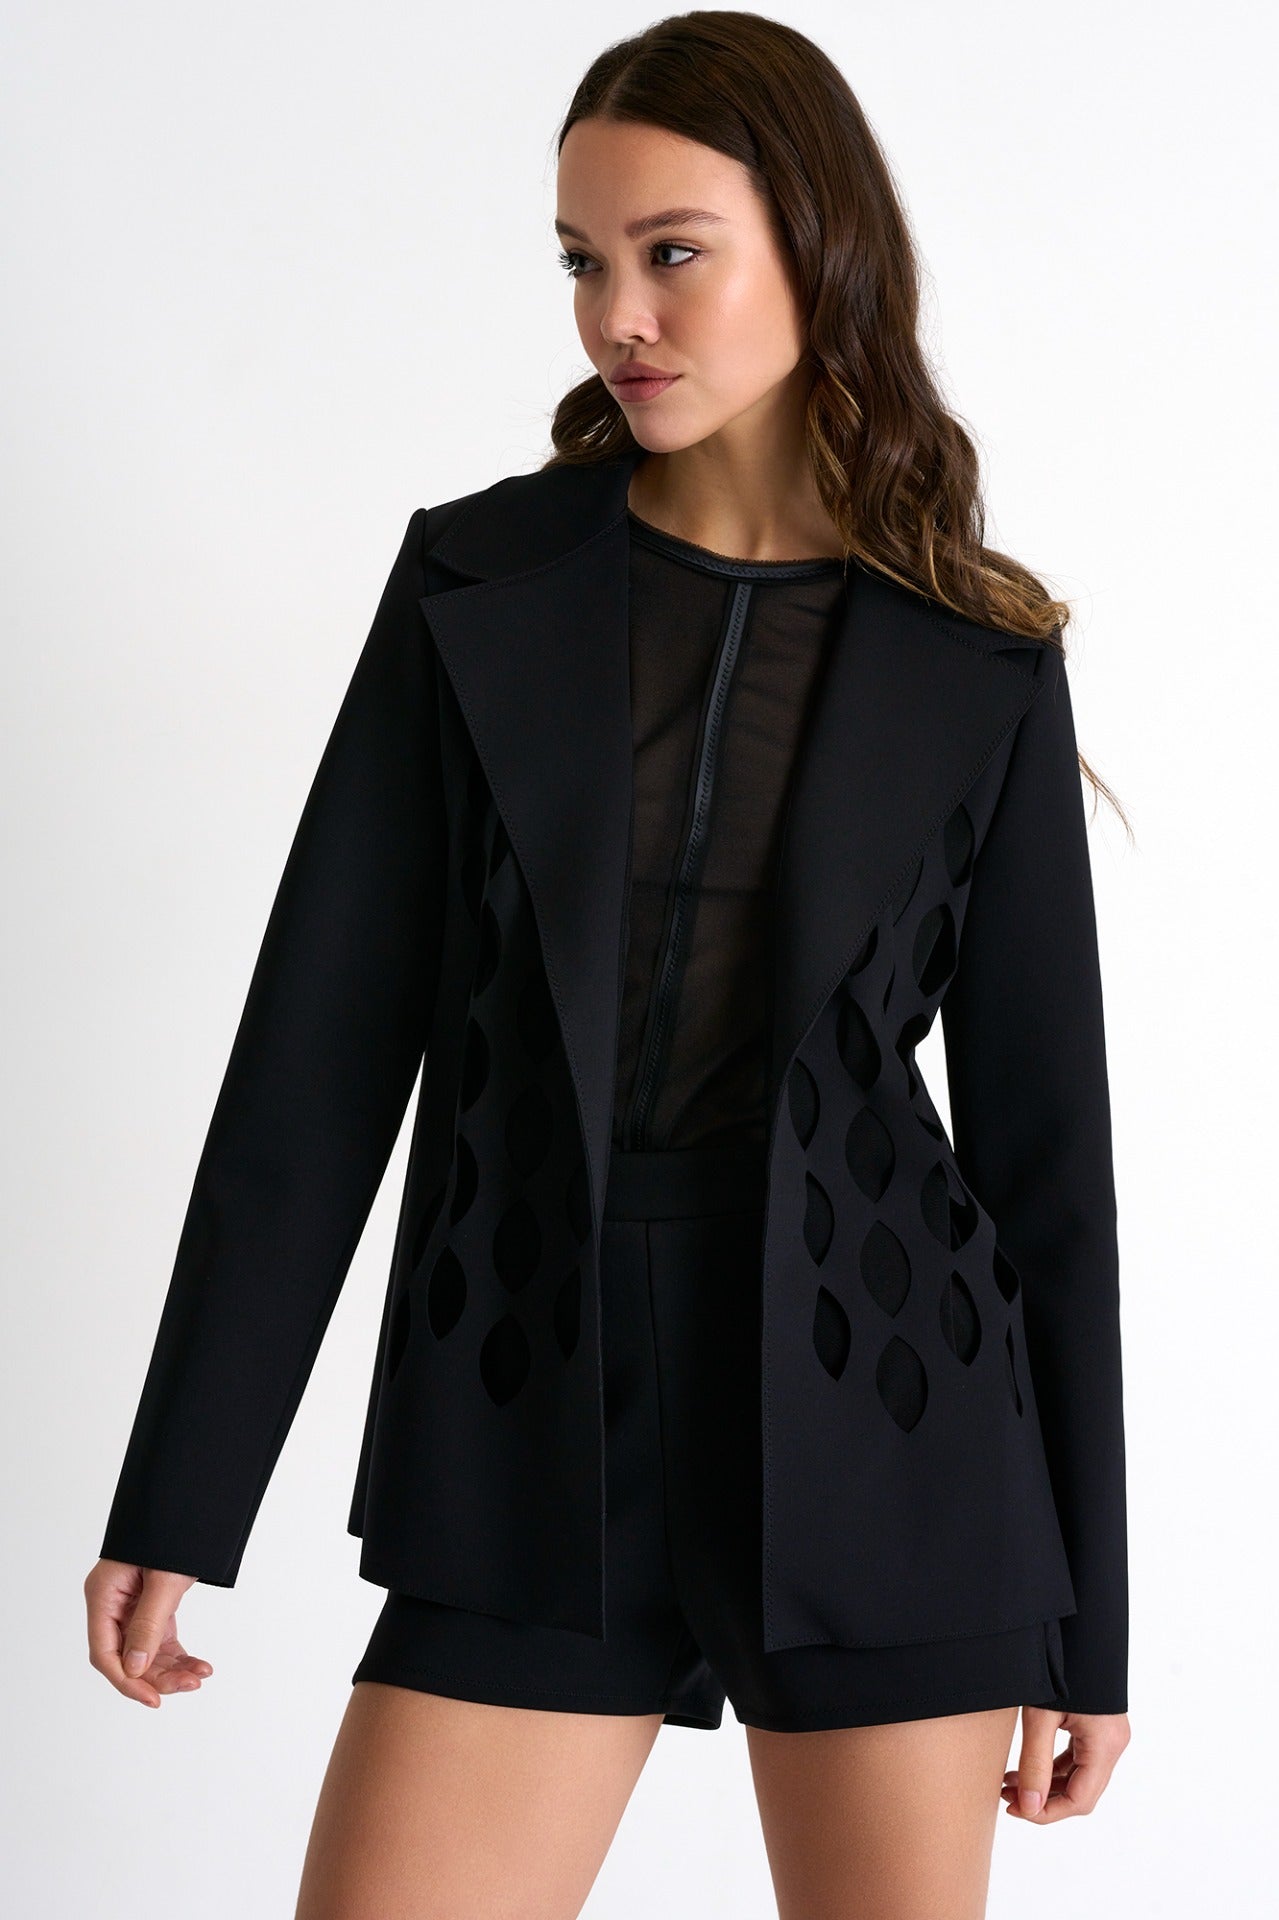 Shan Structured Cut Out Blazer